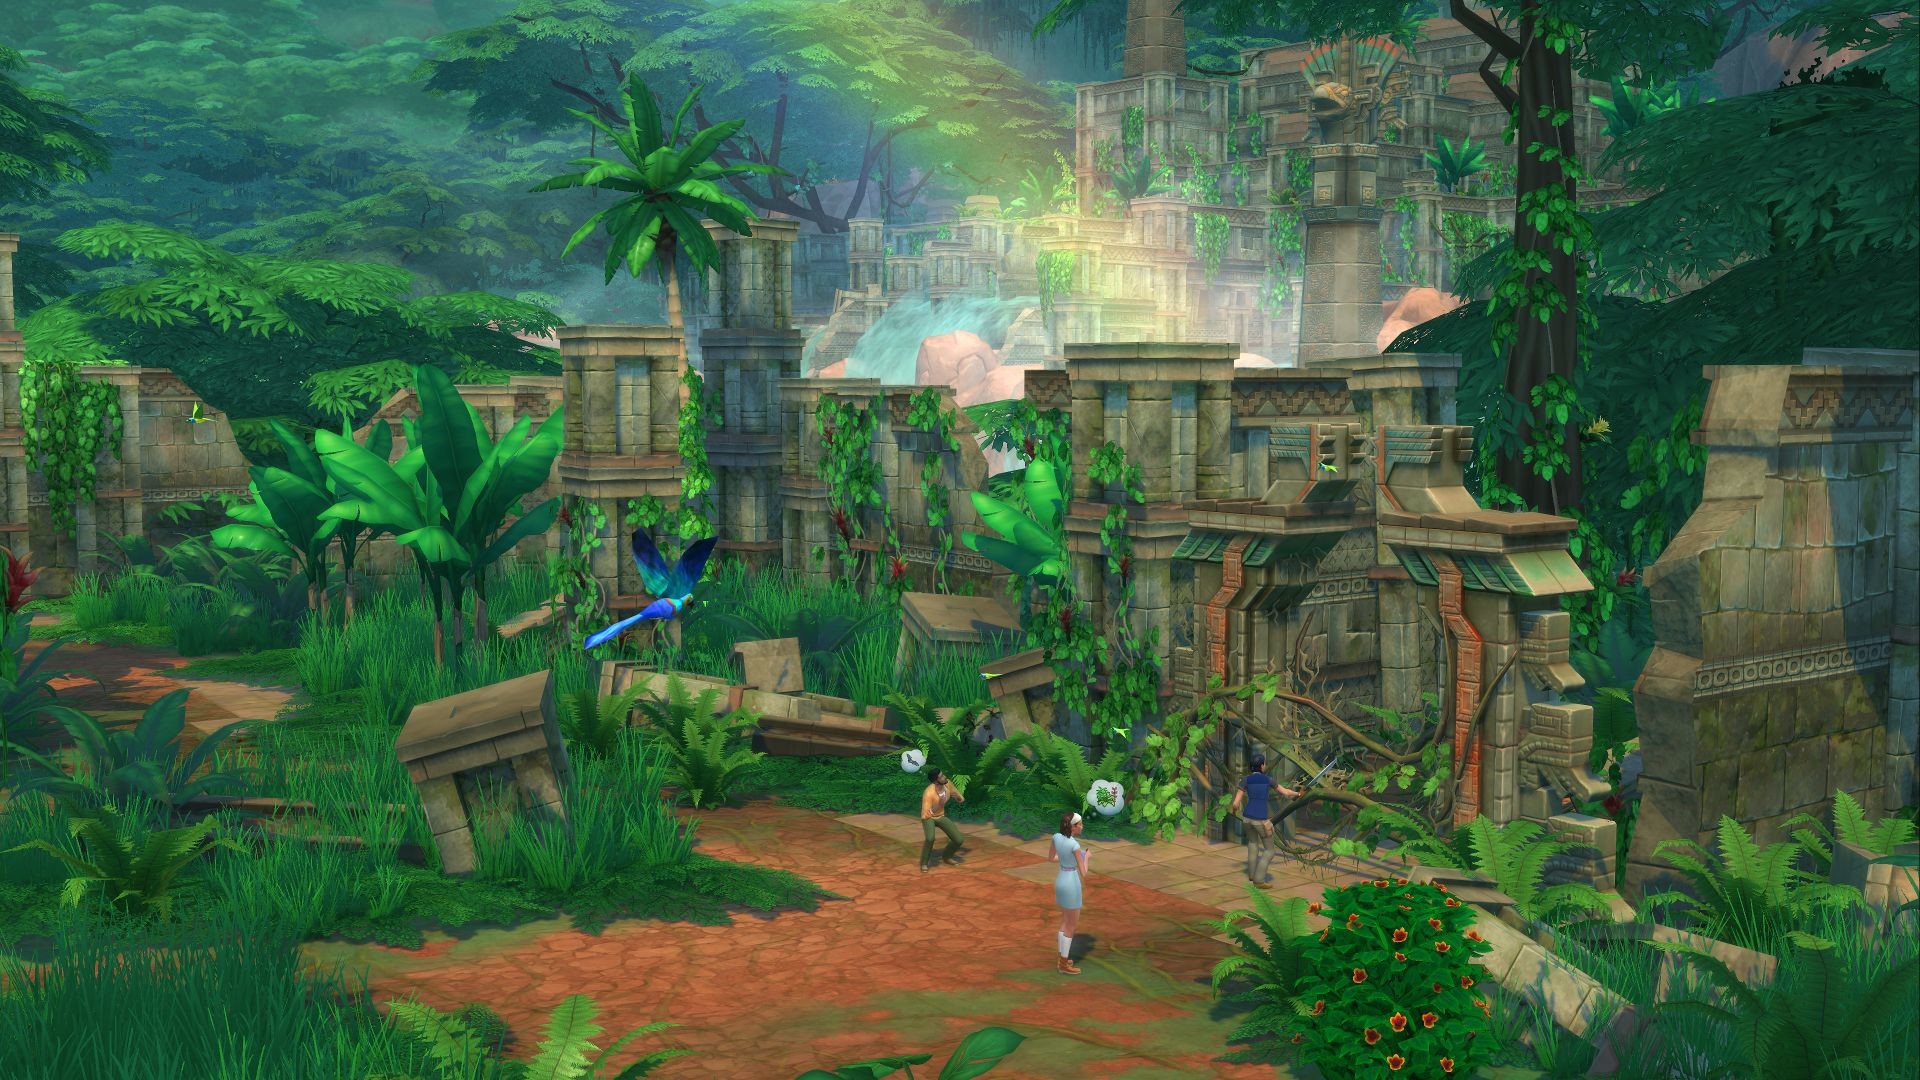 The Sims 4 Jungle Adventure PS4 Version Full Game Free Download